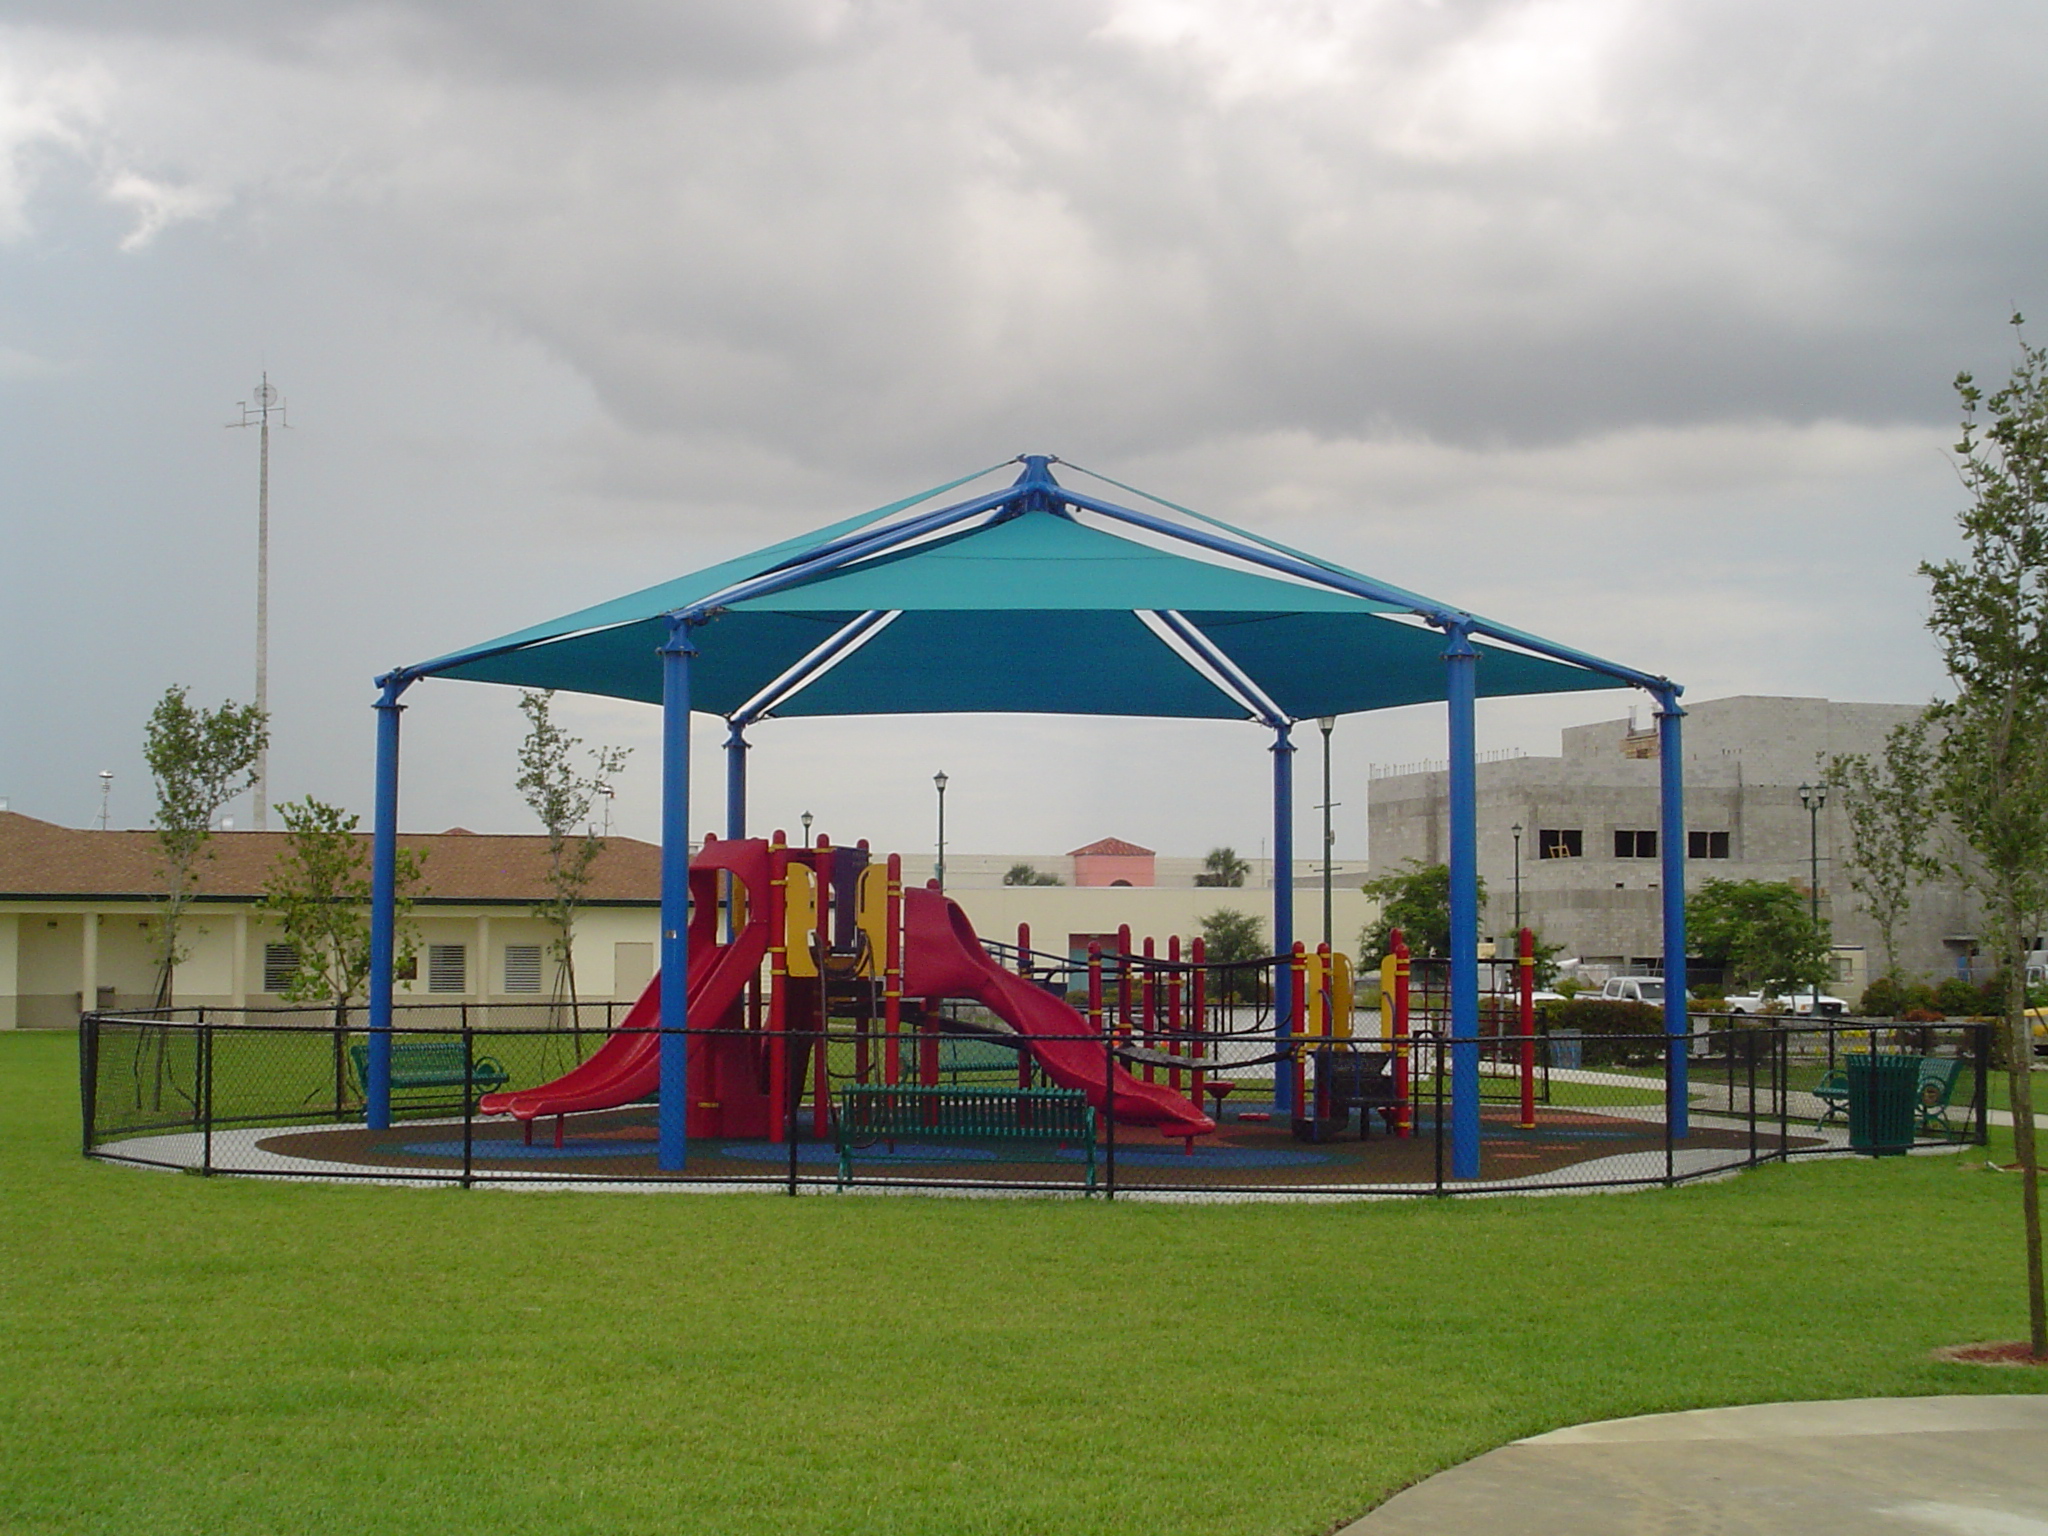 Shade Sail over a playground at the park